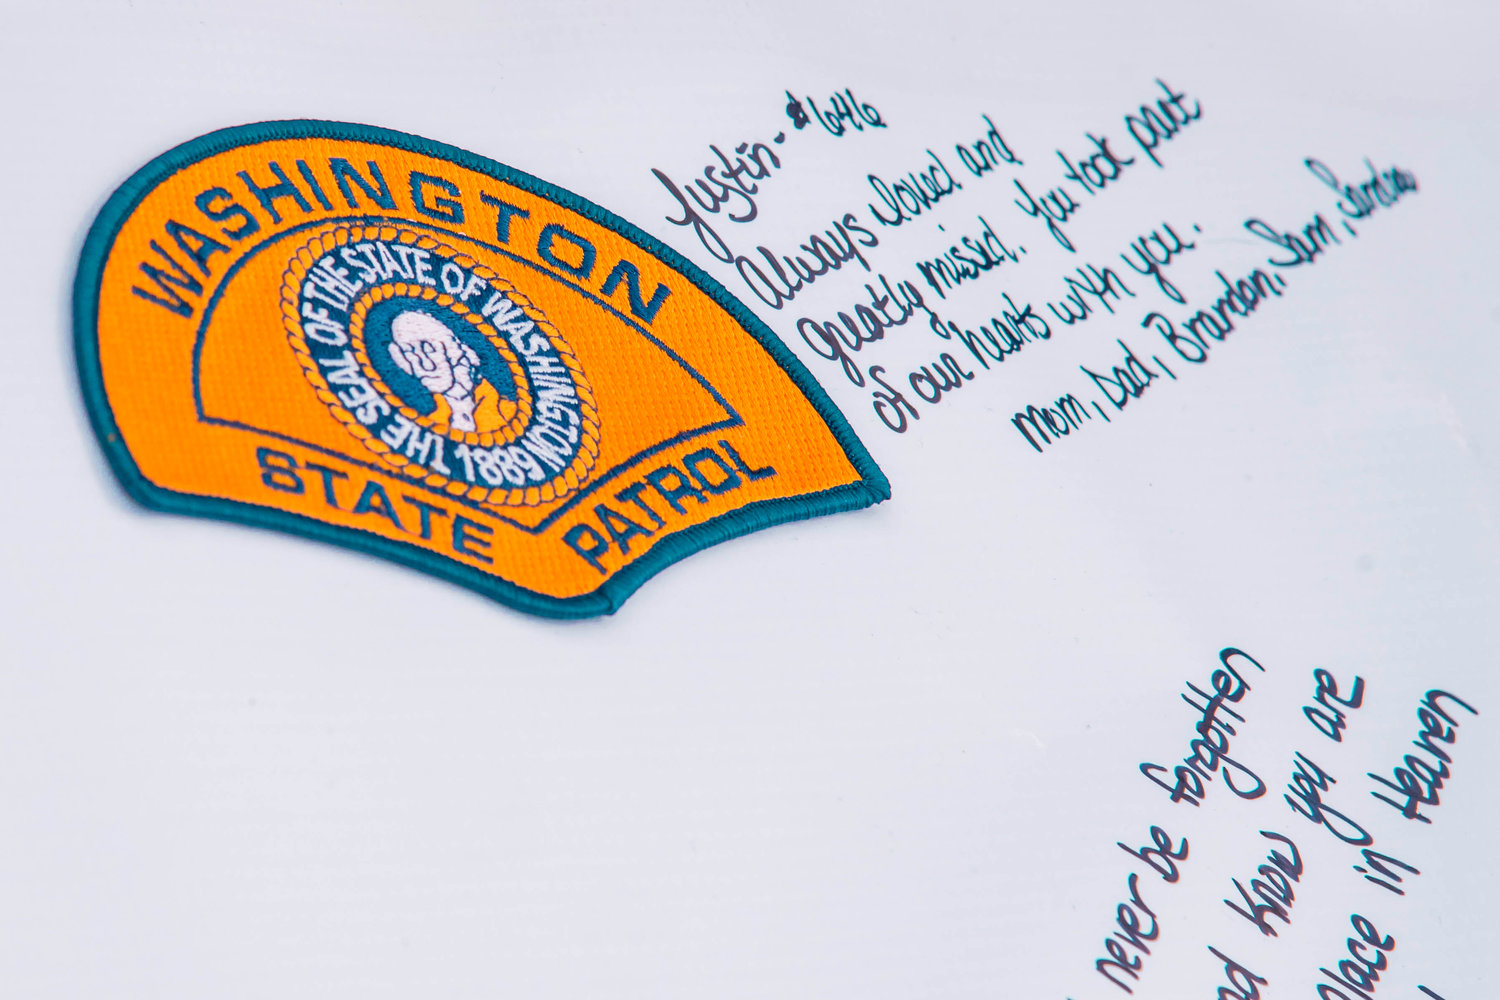 A Washington State Patrol patch is displayed on a board next to a message written by family during a memorial ride for fallen trooper Justin R. Schaffer.